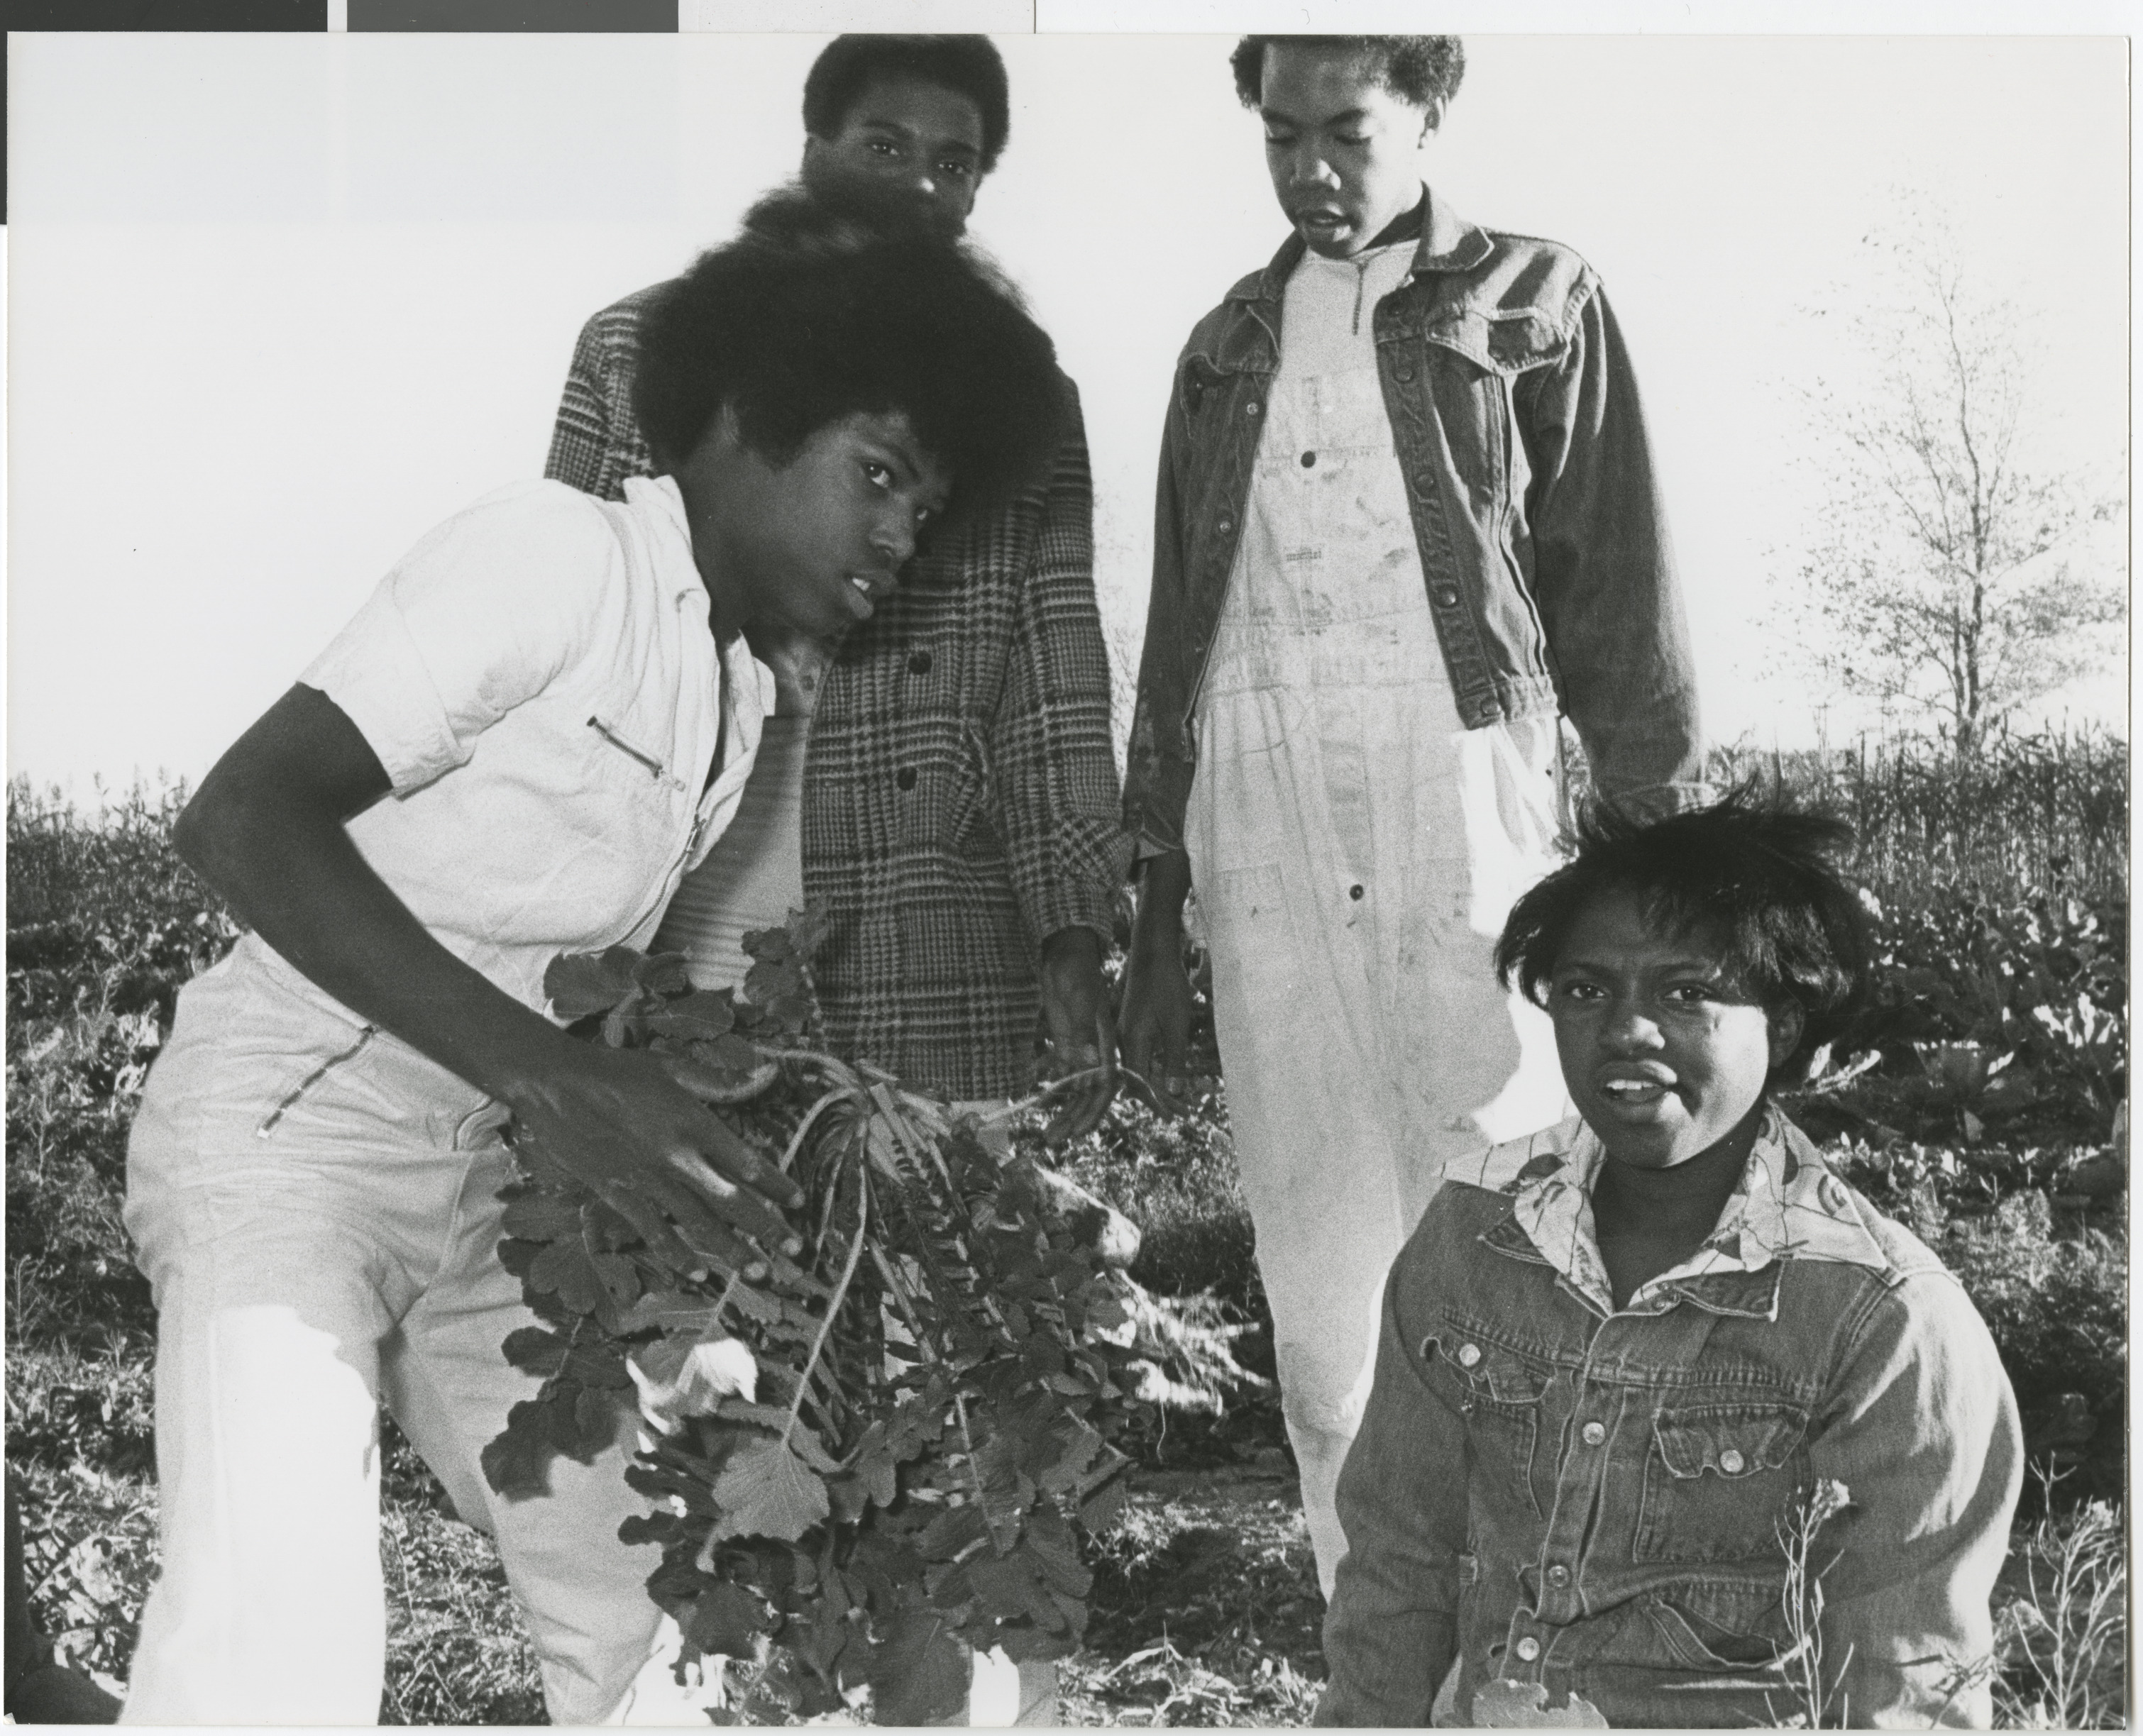 Photograph of community members planting trees and vegetables